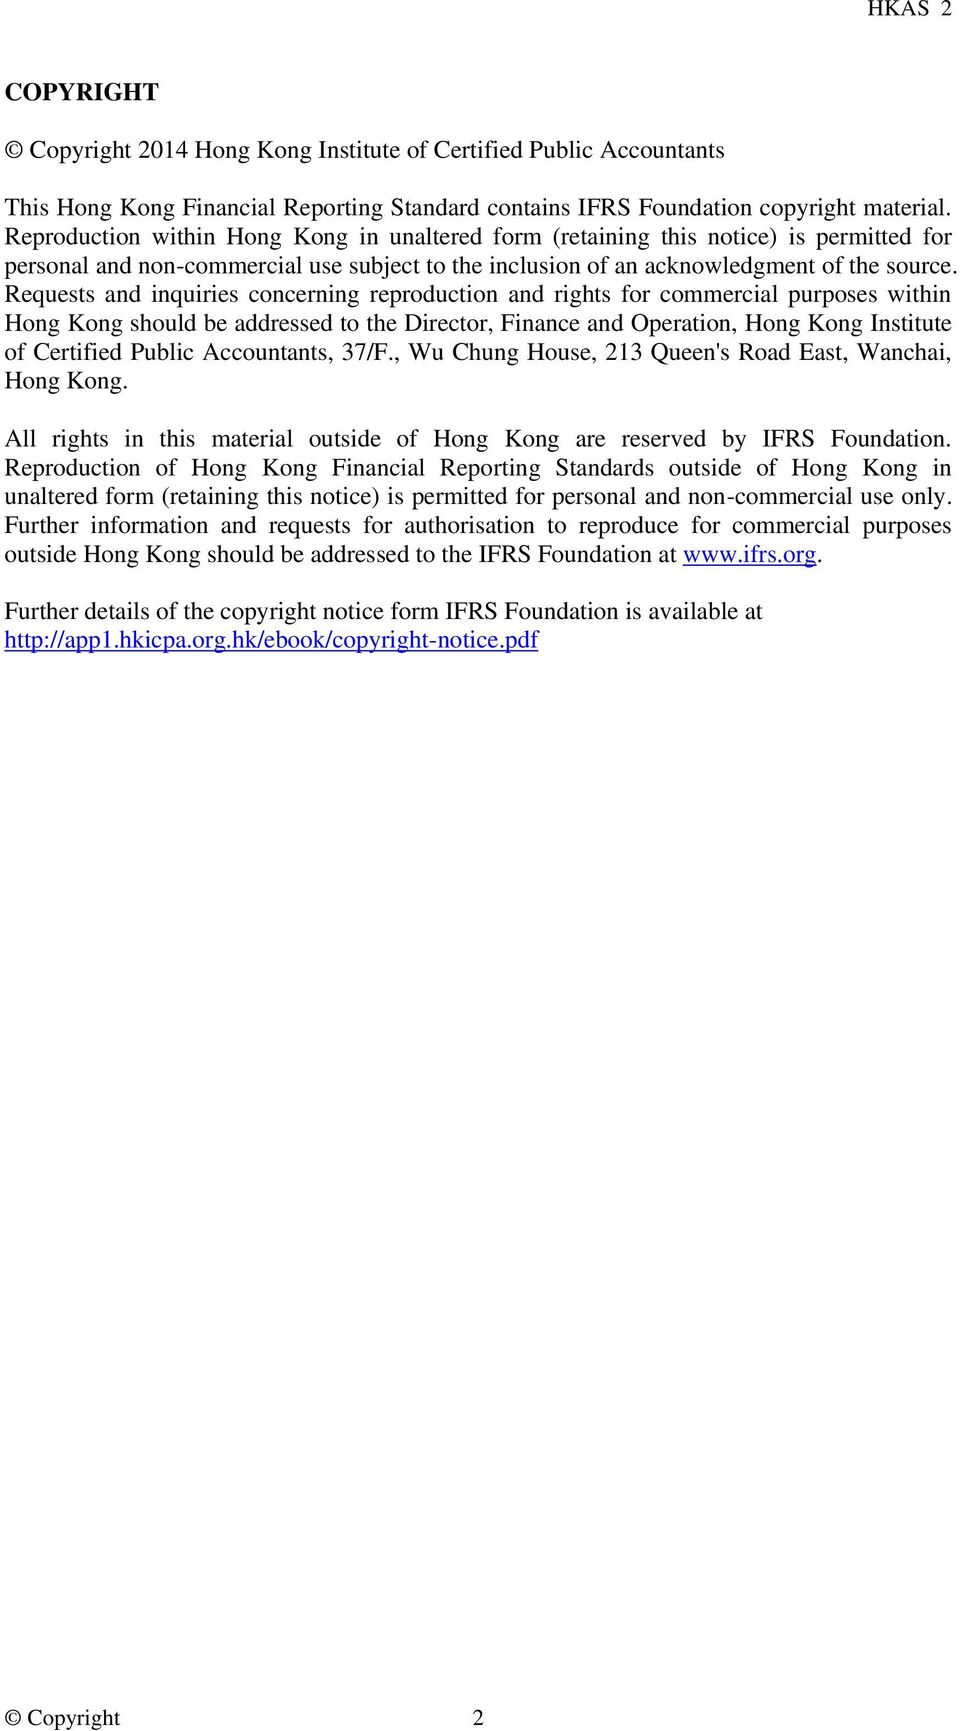 Requests and inquiries concerning reproduction and rights for commercial purposes within Hong Kong should be addressed to the Director, Finance and Operation, Hong Kong Institute of Certified Public